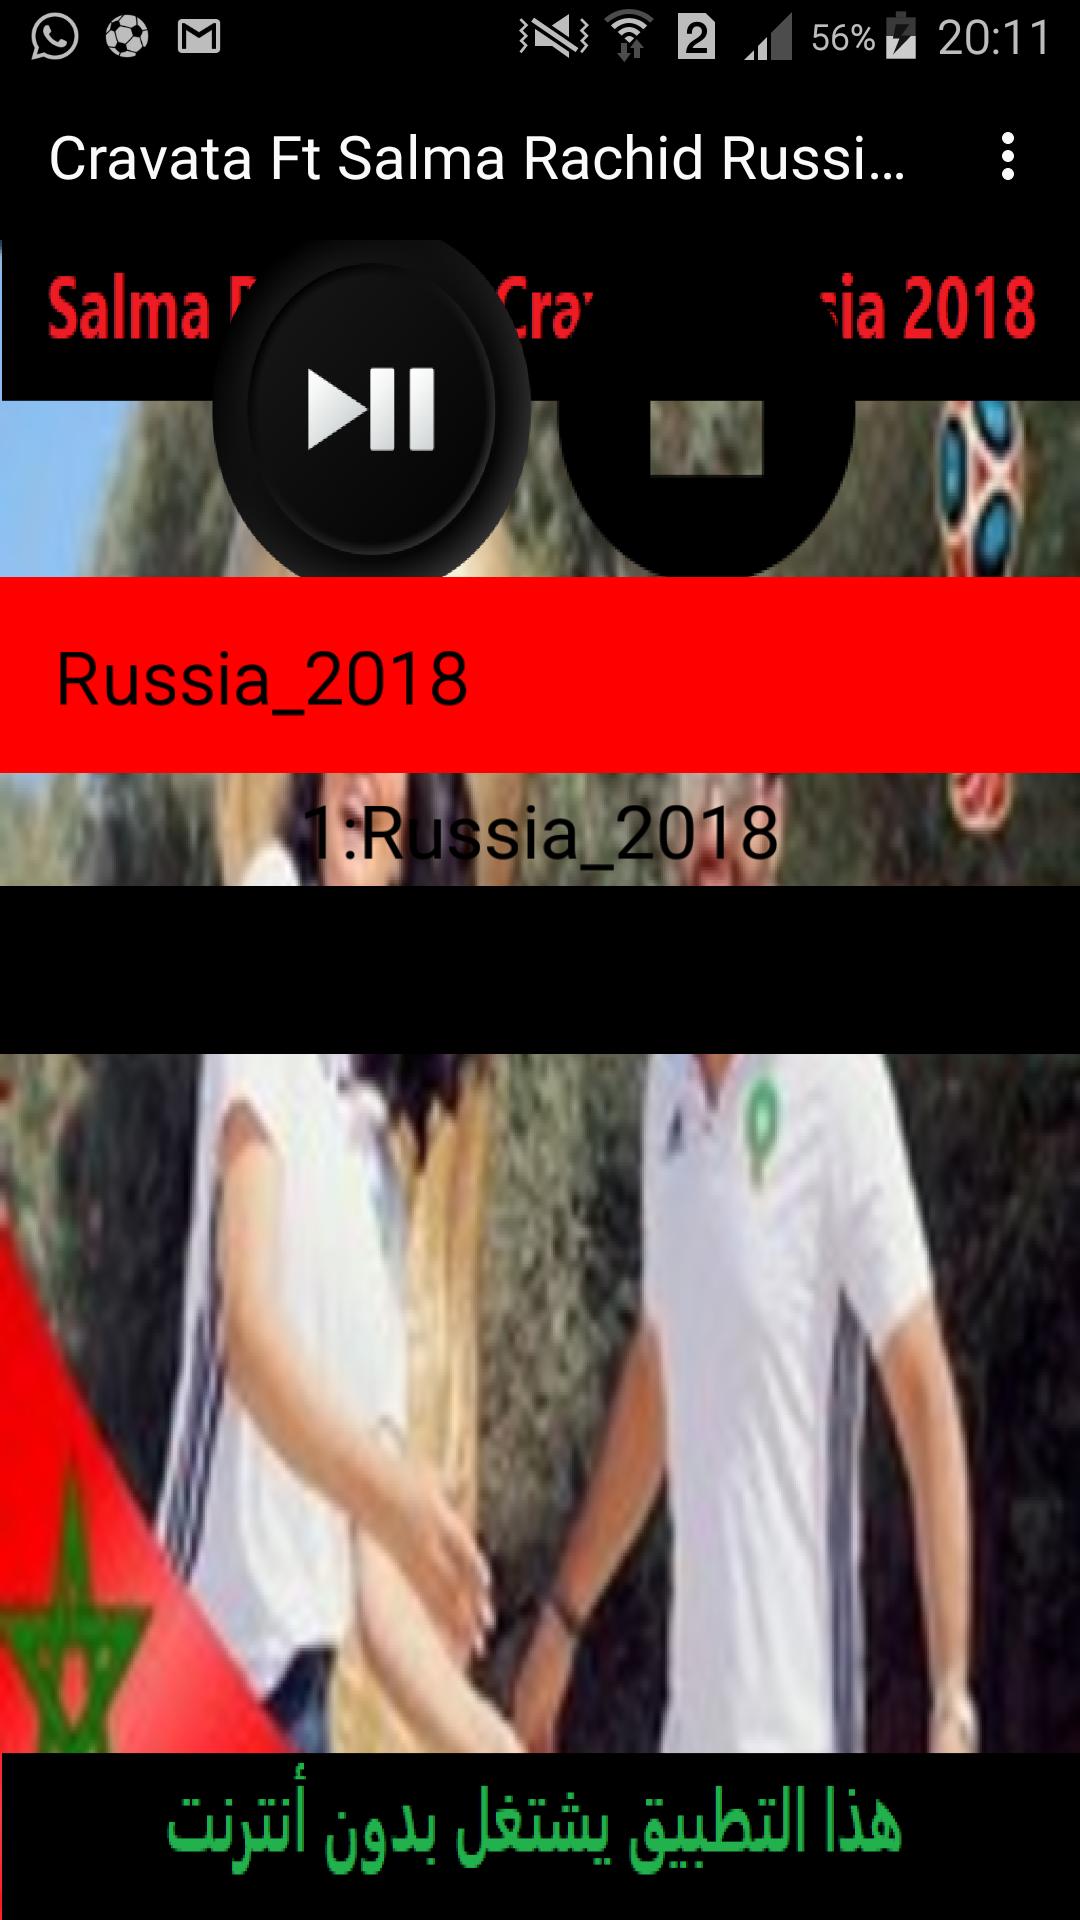 Cravata Ft Salma Rachid Russia 2018 For Android Apk Download